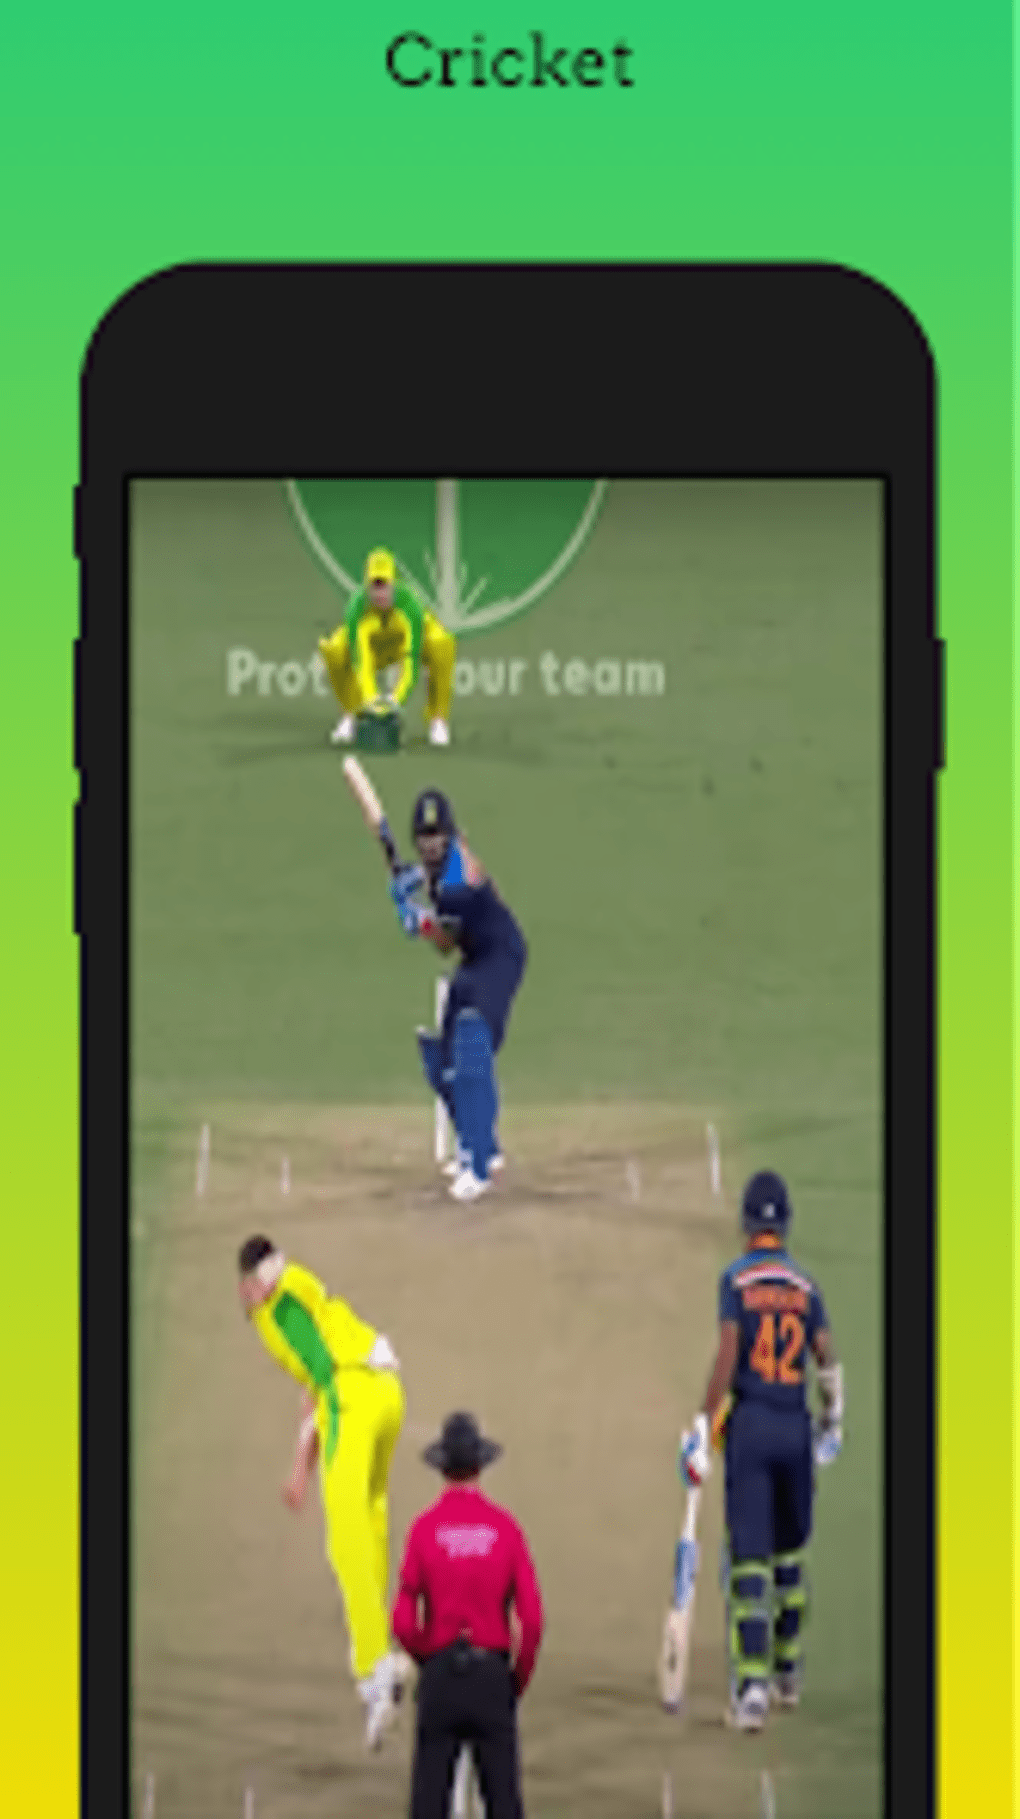 watch live cricket match on android mobile